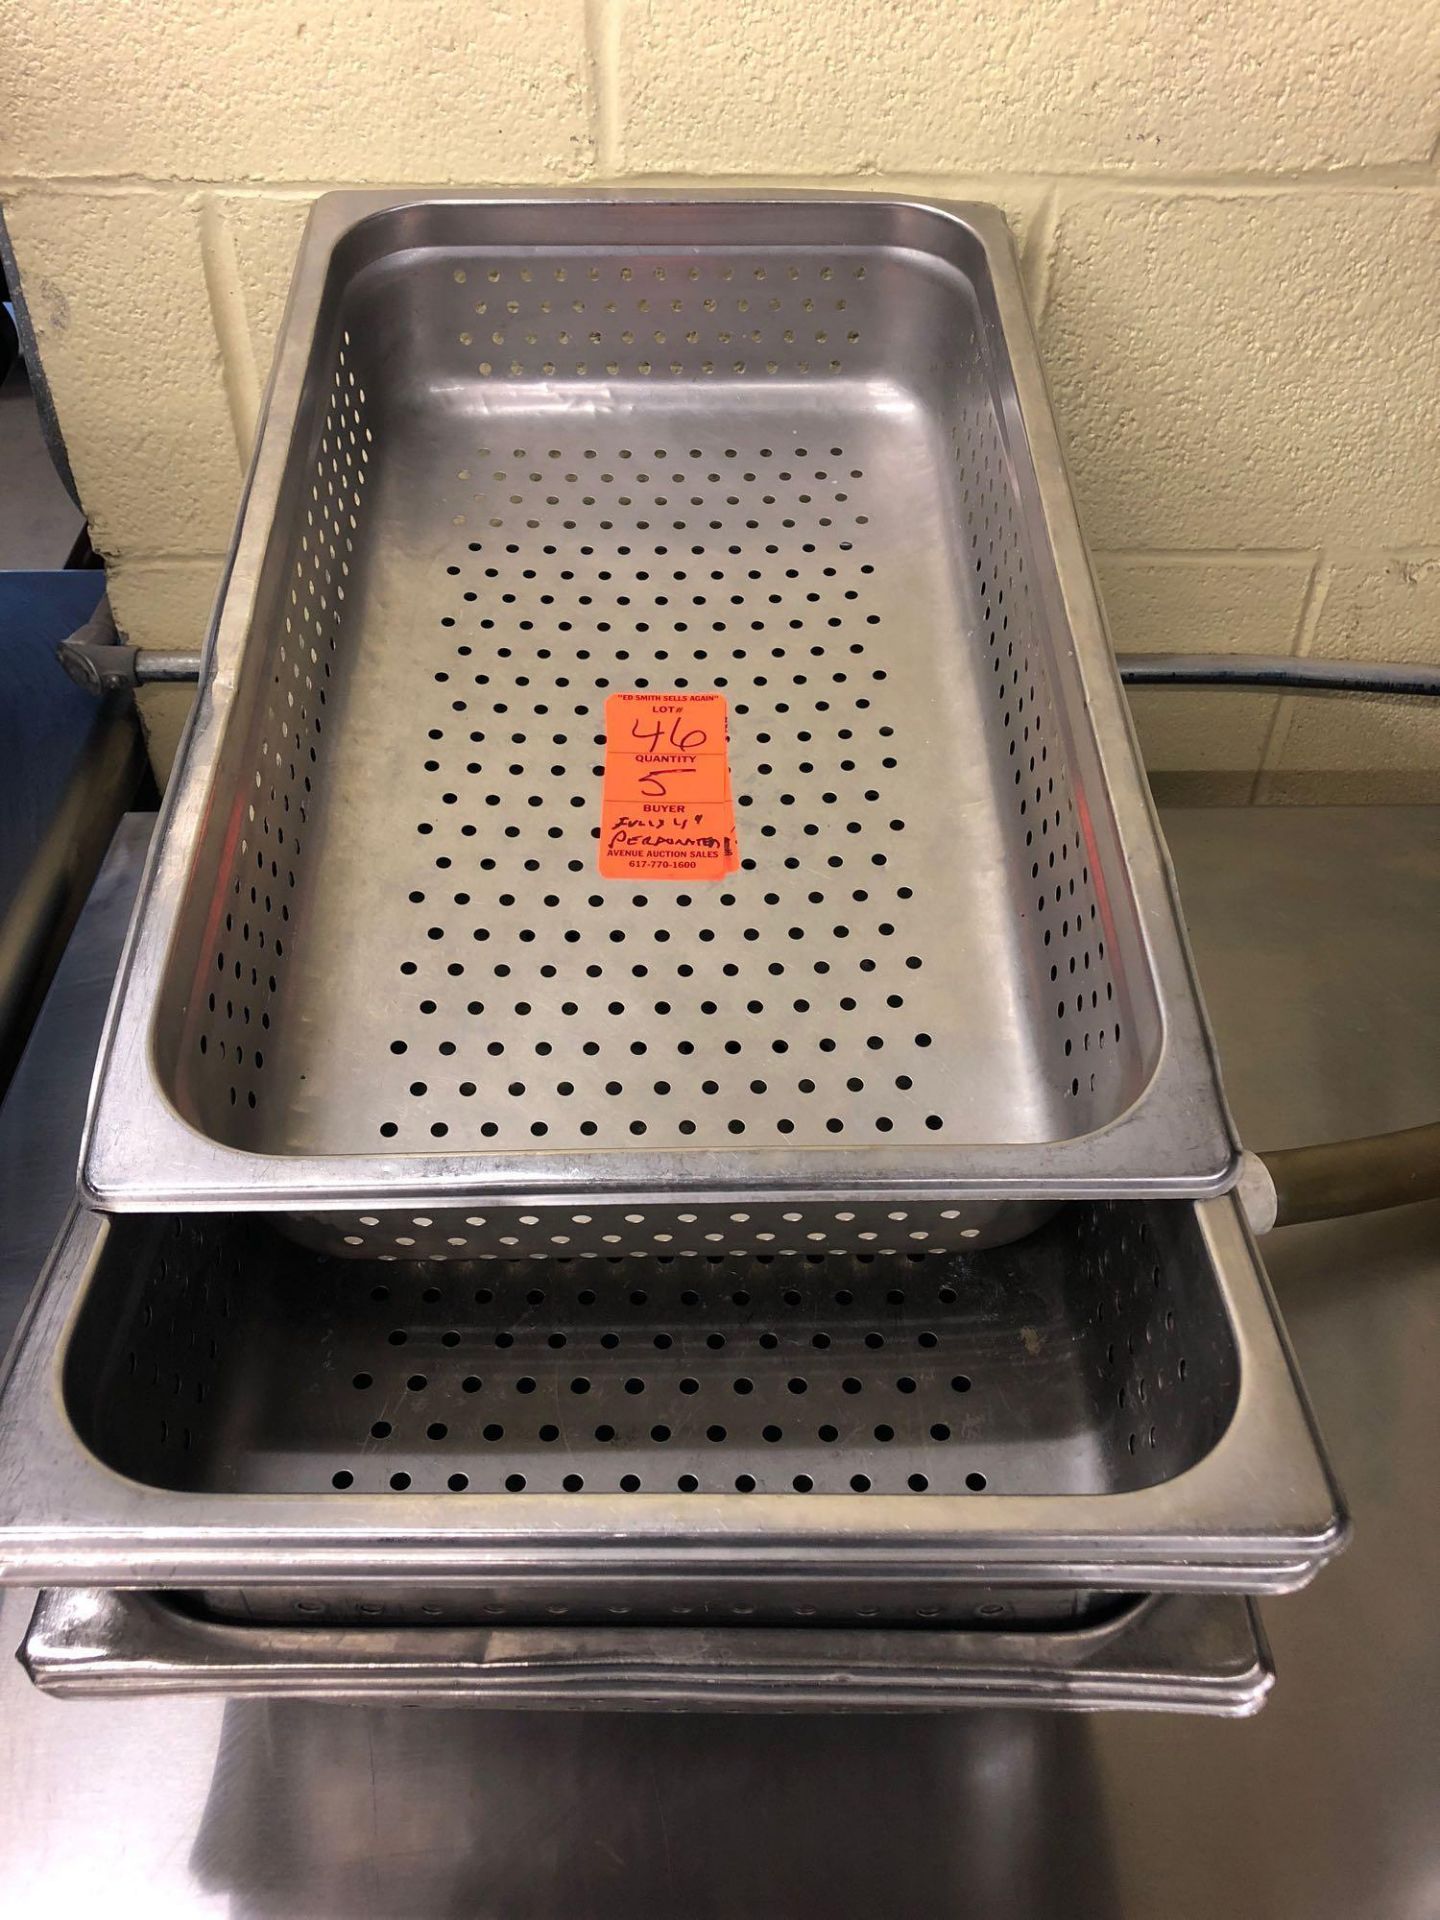 Full size by 4 inch perforated hotel pans